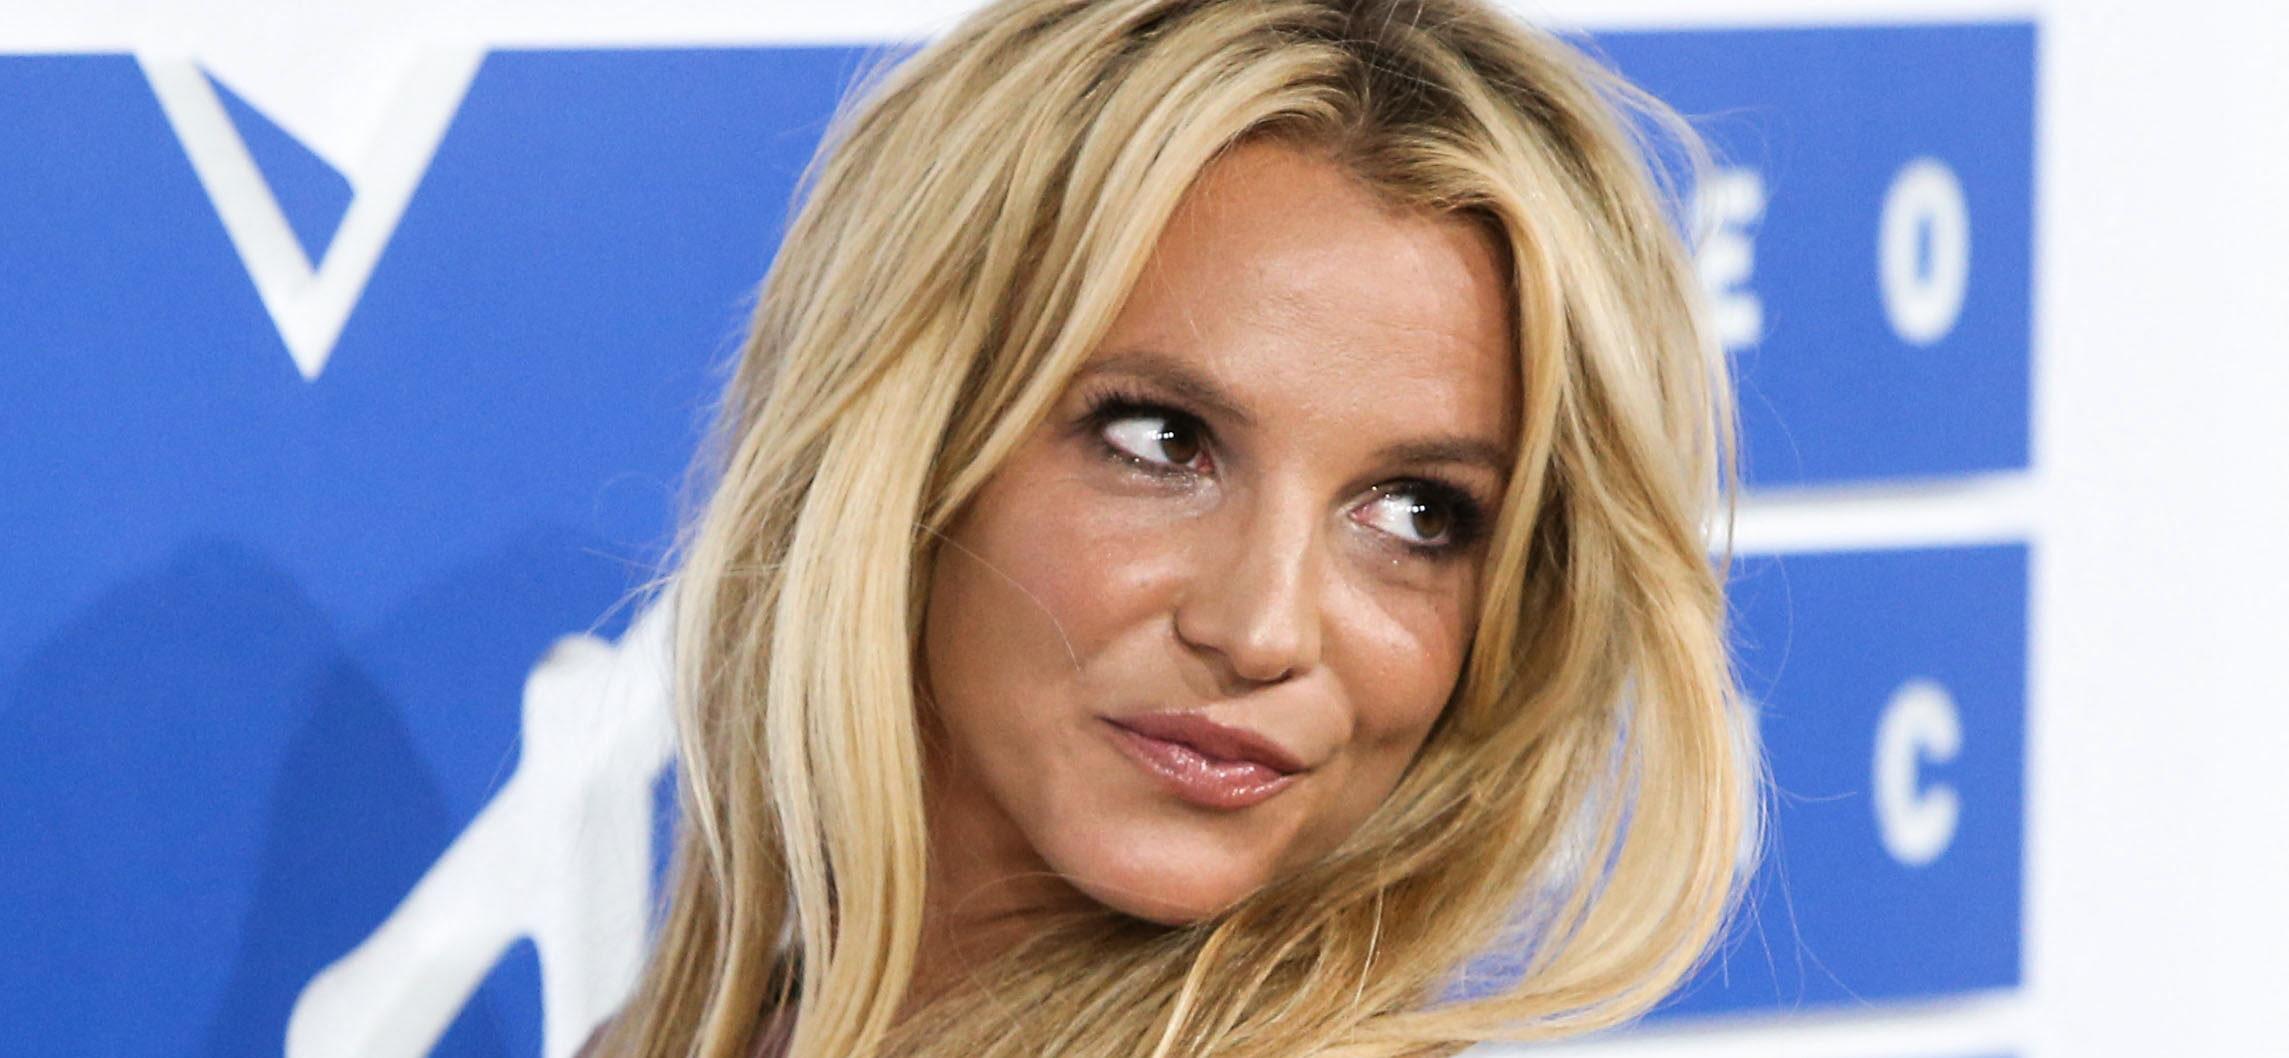 Britney Spears In Plunging Animal-Print Onesie Talks About Being ‘Lied To’ and ‘Tricked’